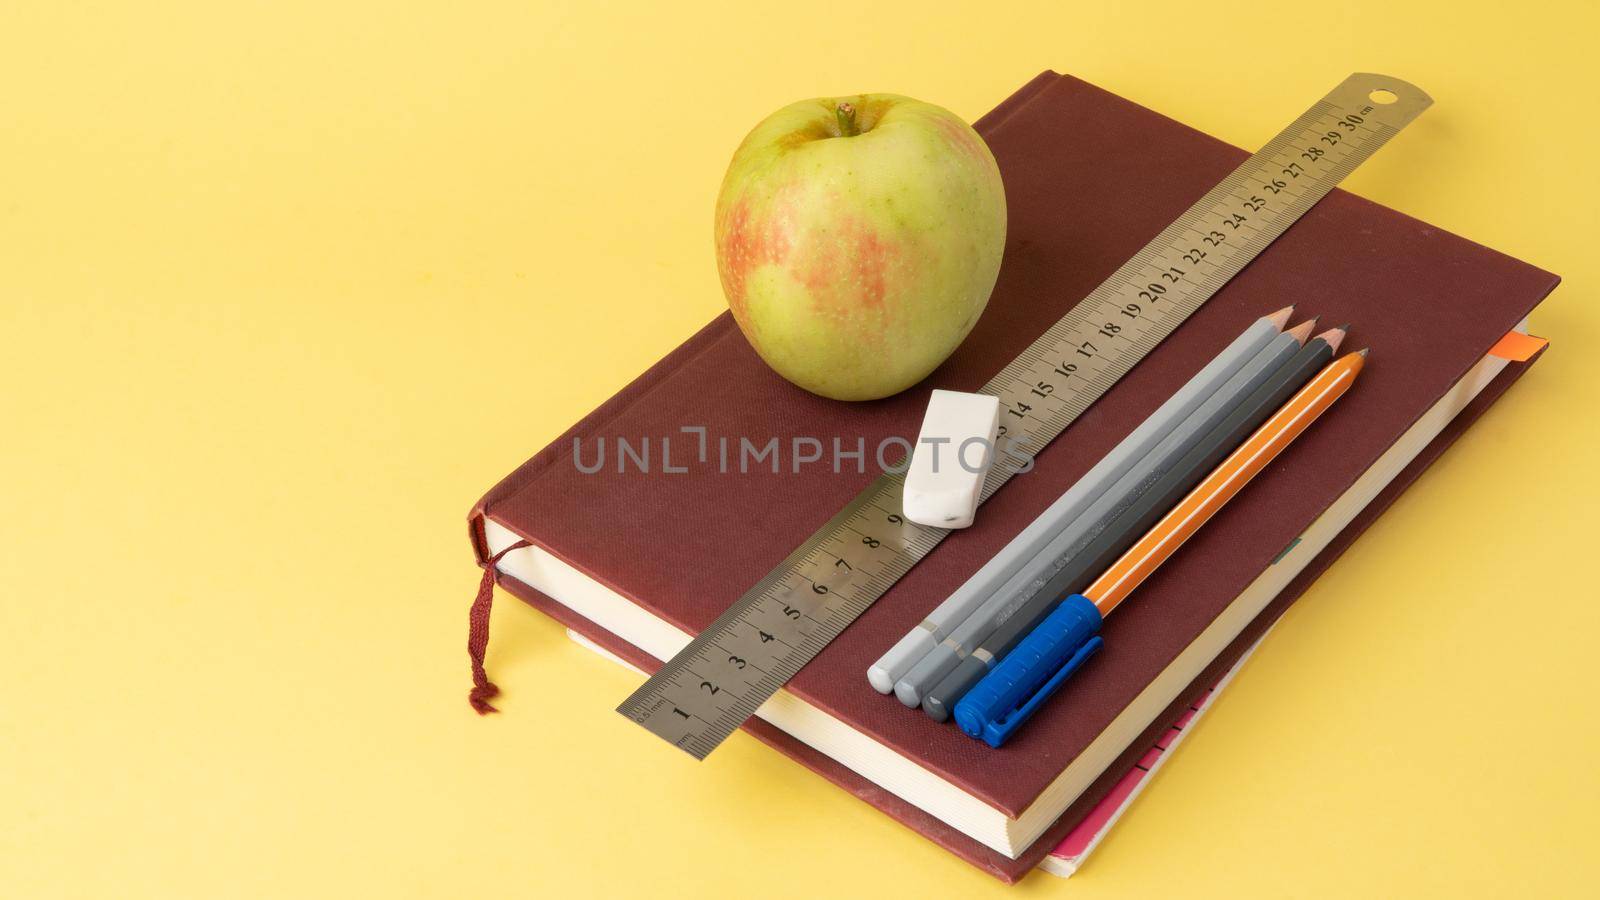 Educational supplies - stationery, book, apple on a yellow background by voktybre